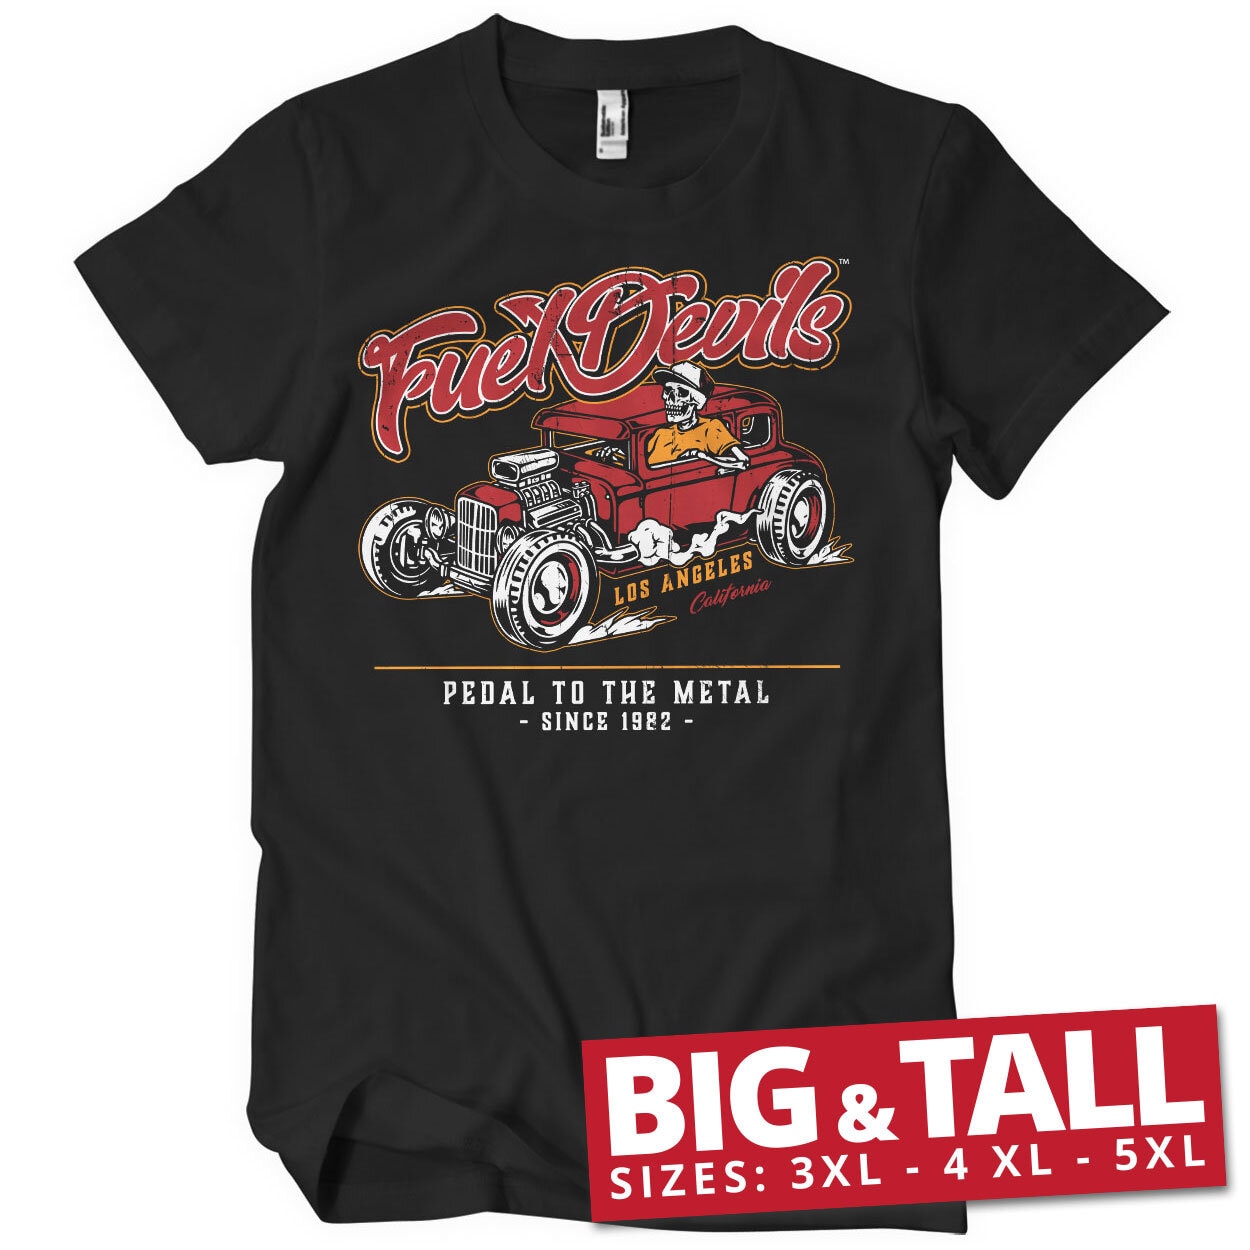 Fuel Devils - Pedal To The Metal Big & Tall T-Shirt